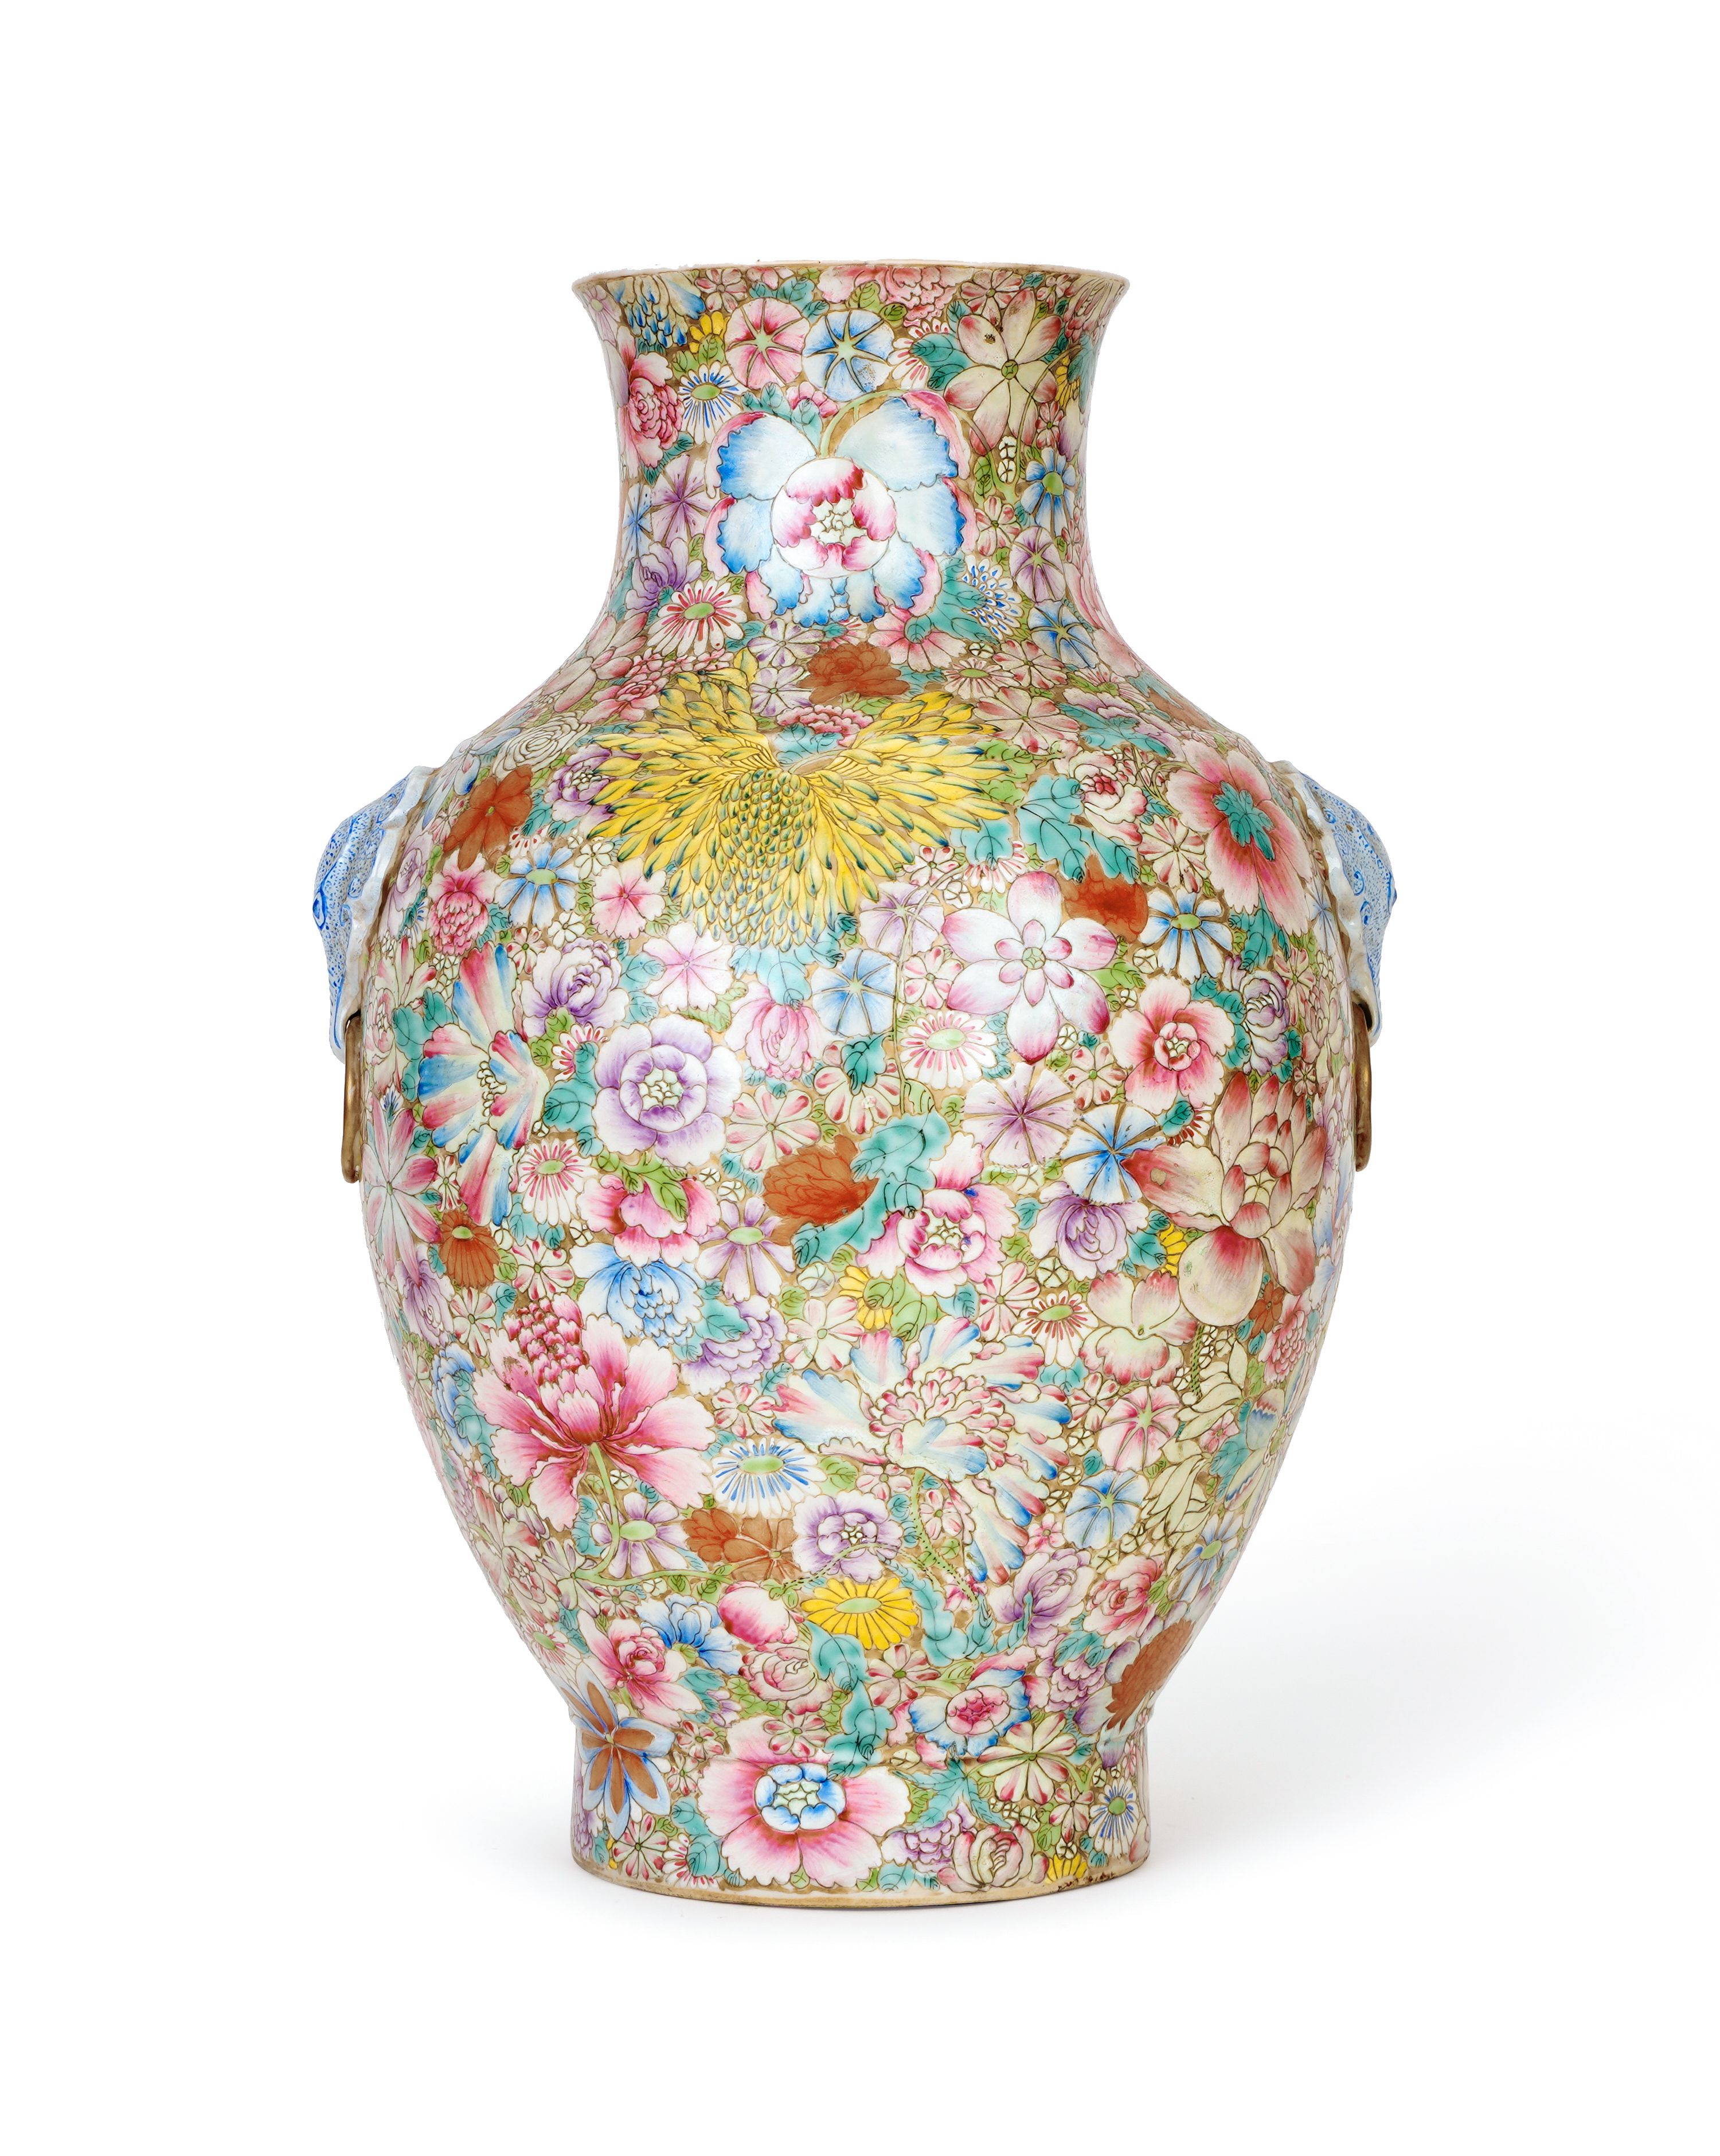 A CHINESE FAMILLE ROSE MILLEFLEUR HU VASE, QIANLONG MARK, QING DYNASTY (1644-1911)